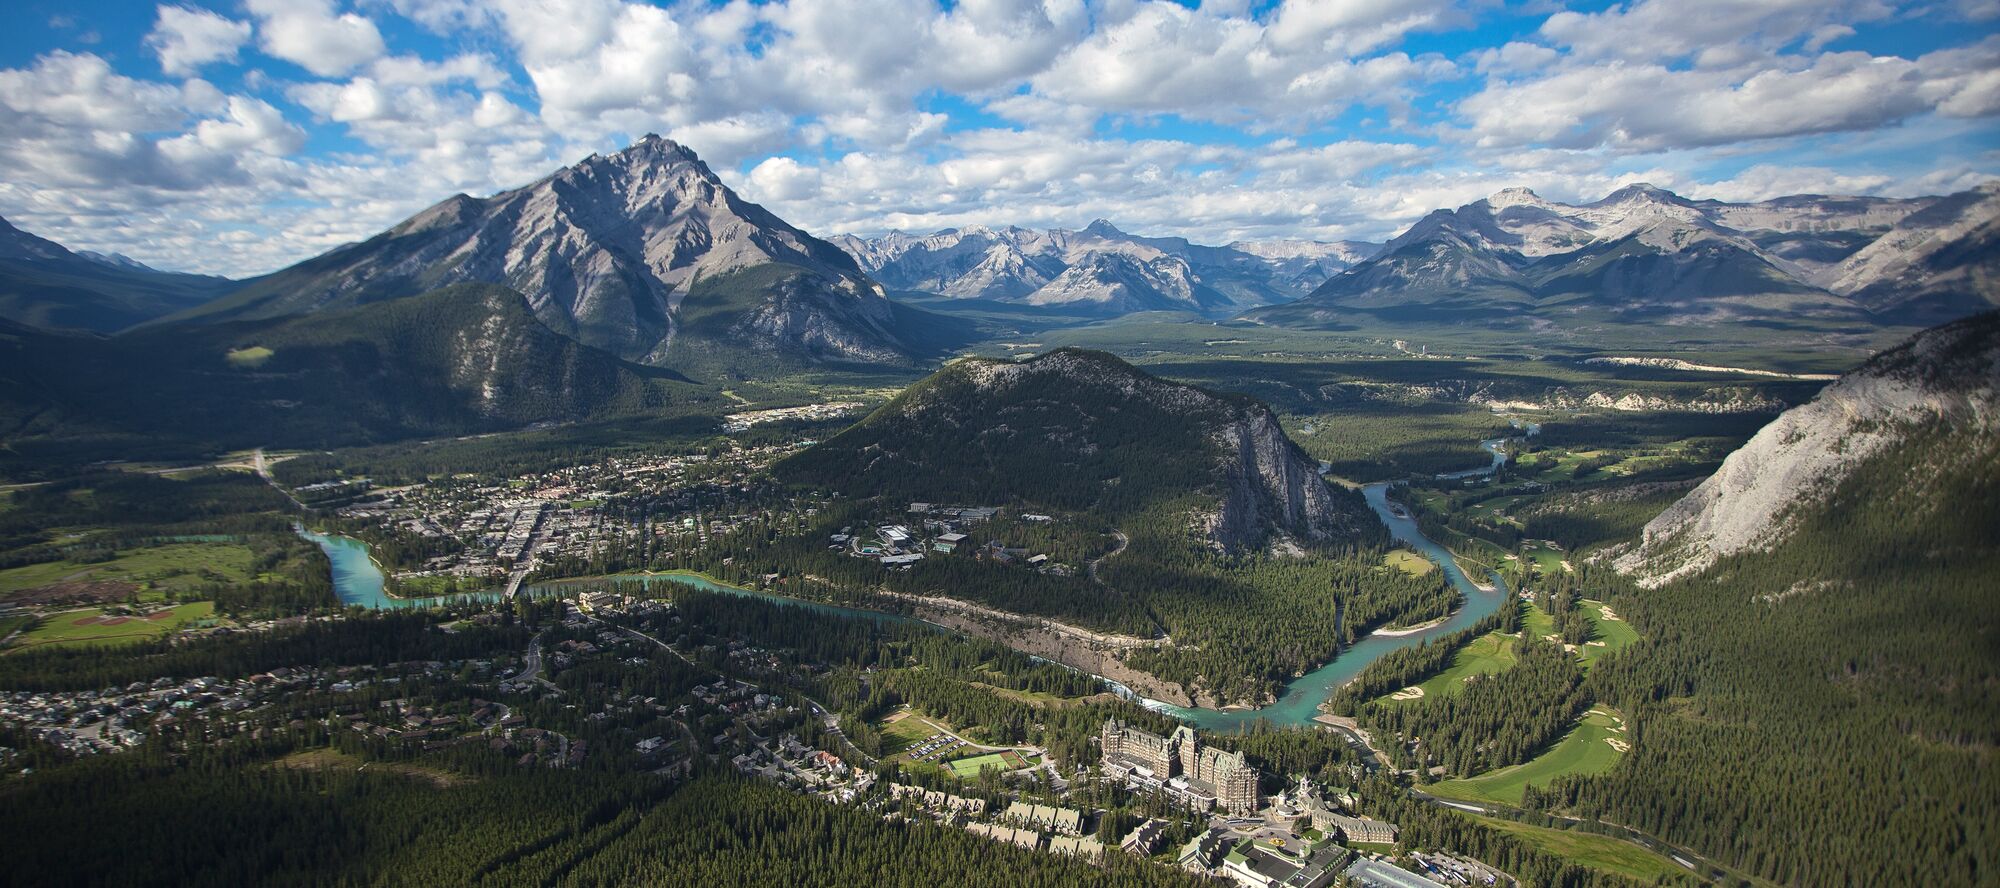 An aerial view of the town of Banff on a cloudy summer day showcasing Tunnel Mountain and Cascade